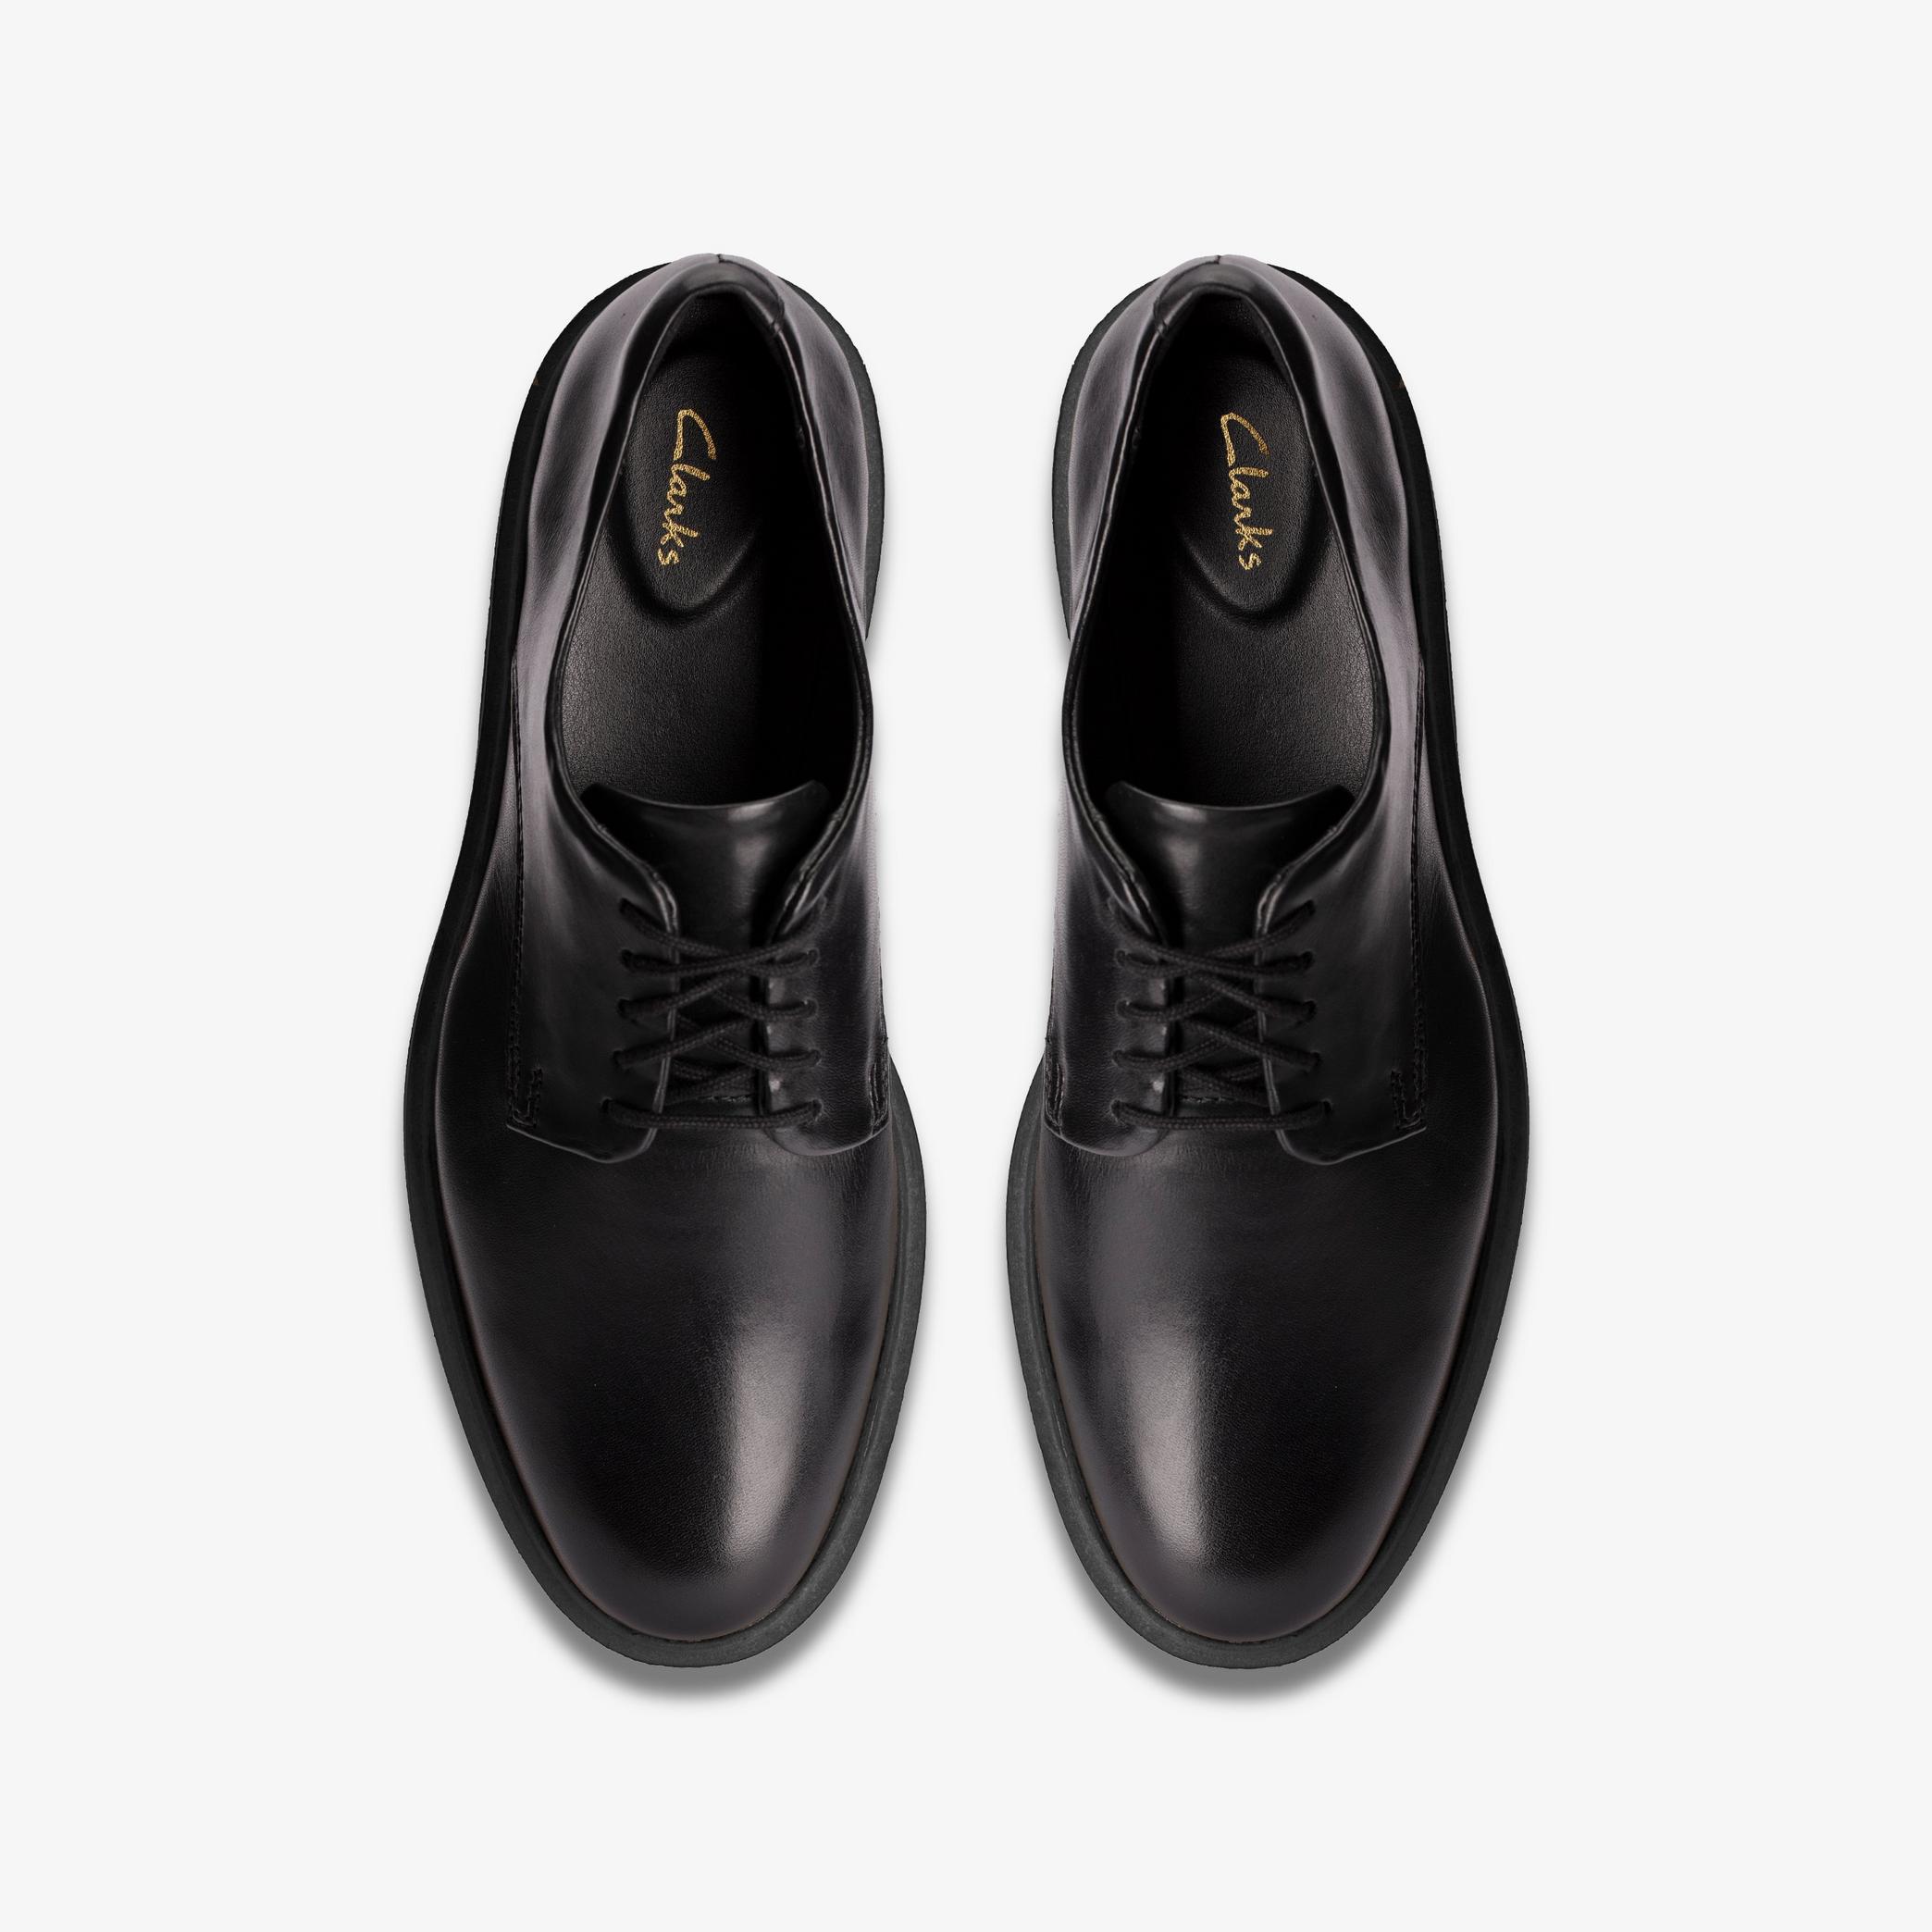 WOMENS Glickly Derby Black Leather Derby Shoe | Clarks Outlet